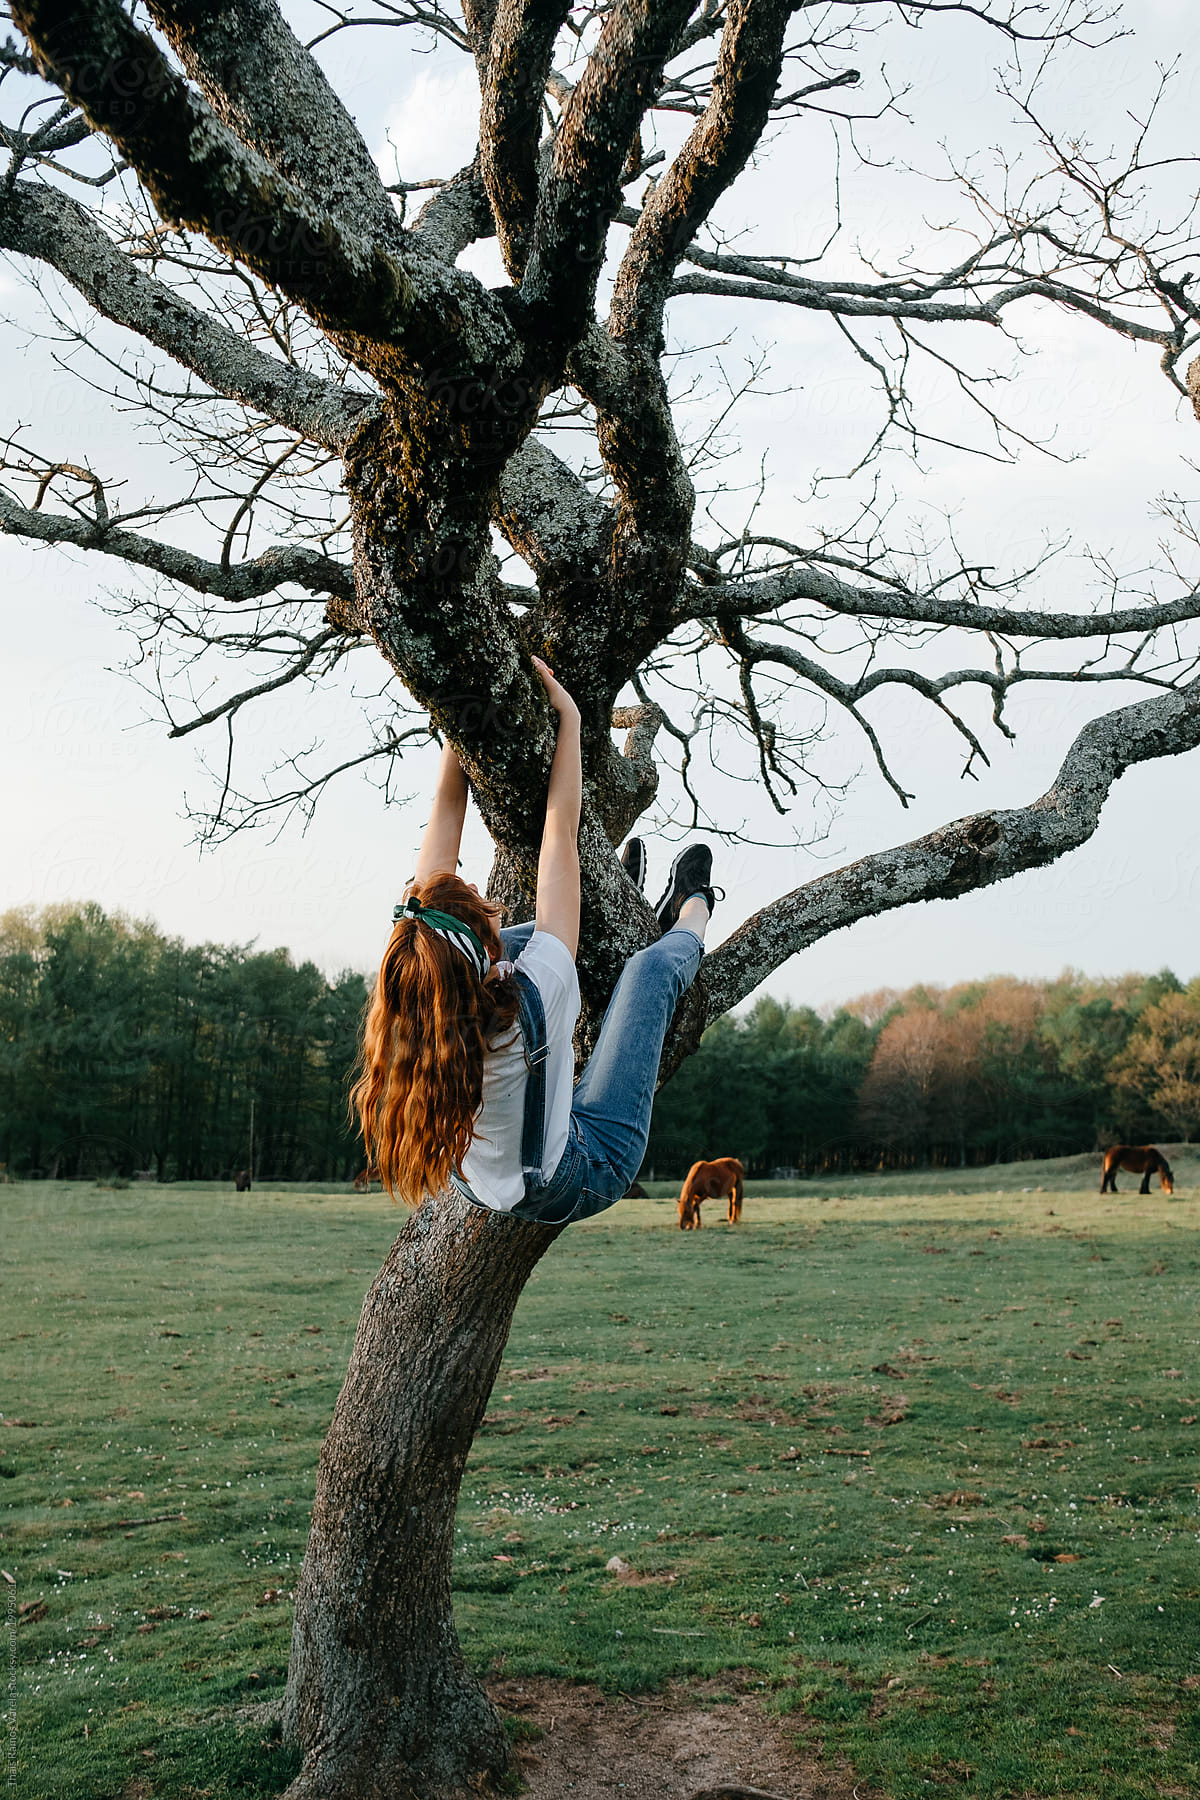 Beautiful Woman in a Special Outfit Climbing the Trees Stock Photo